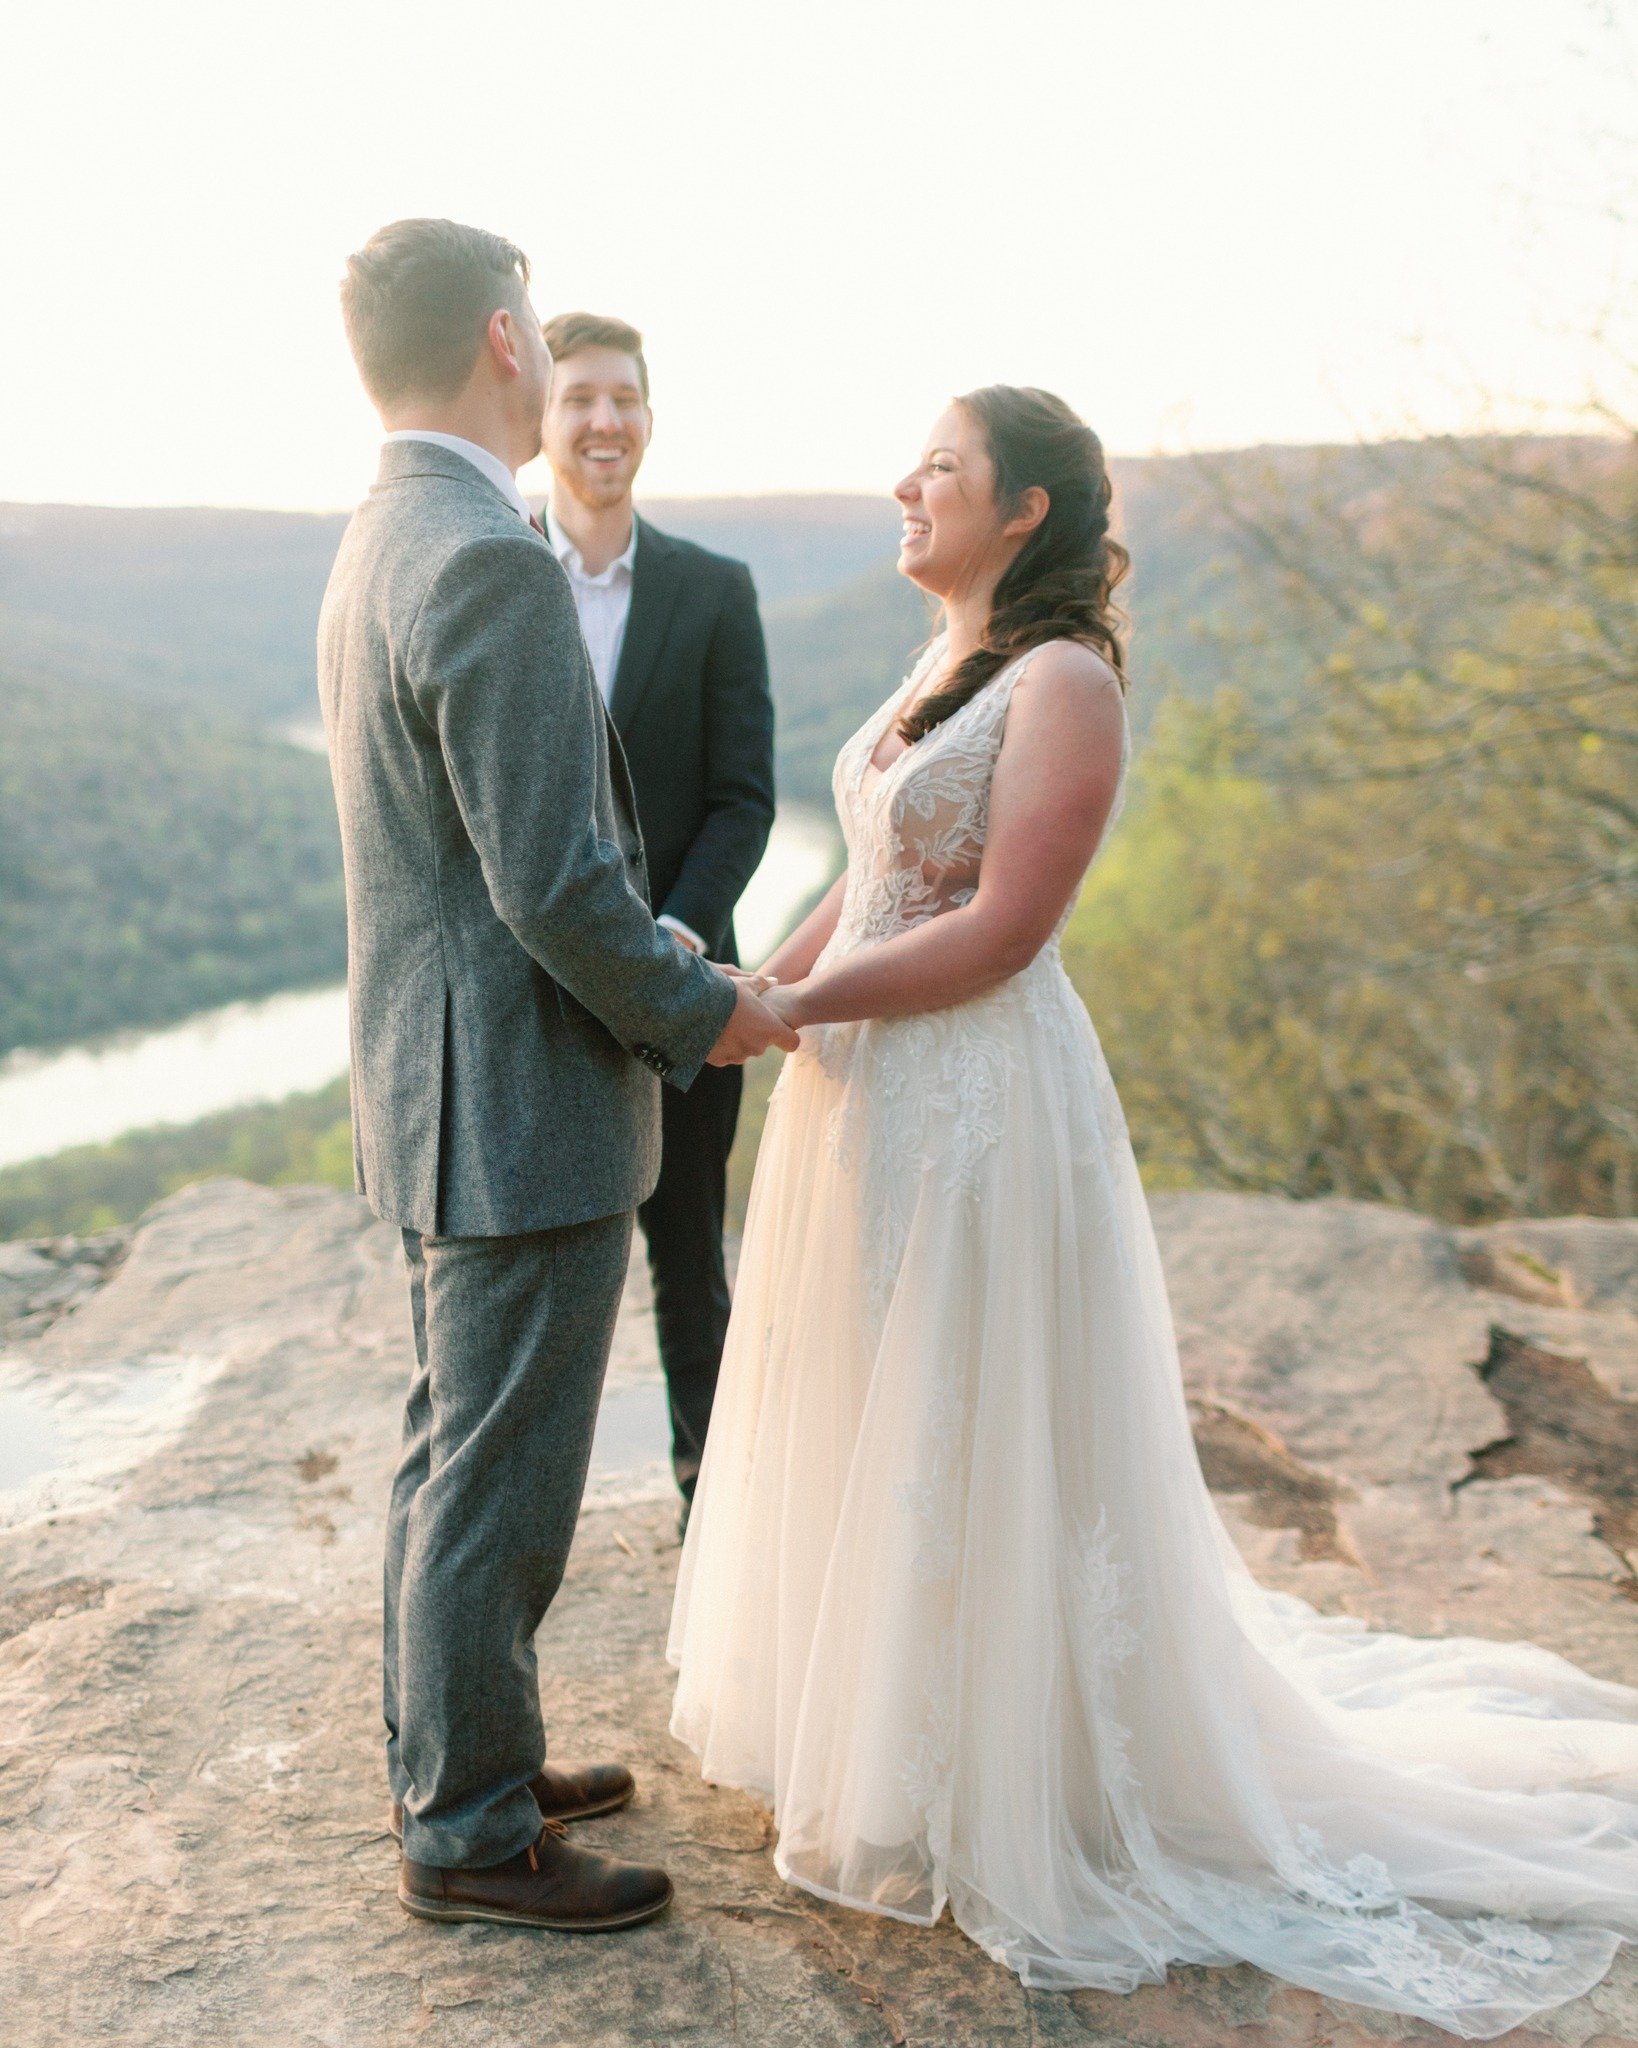 Have you thought about who will officiate your wedding? Depending on your state, there's lots of options!

- Ask your current or childhood pastor. If your faith and relationship journey has been supported and impacted by a pastor, it can be meaningfu